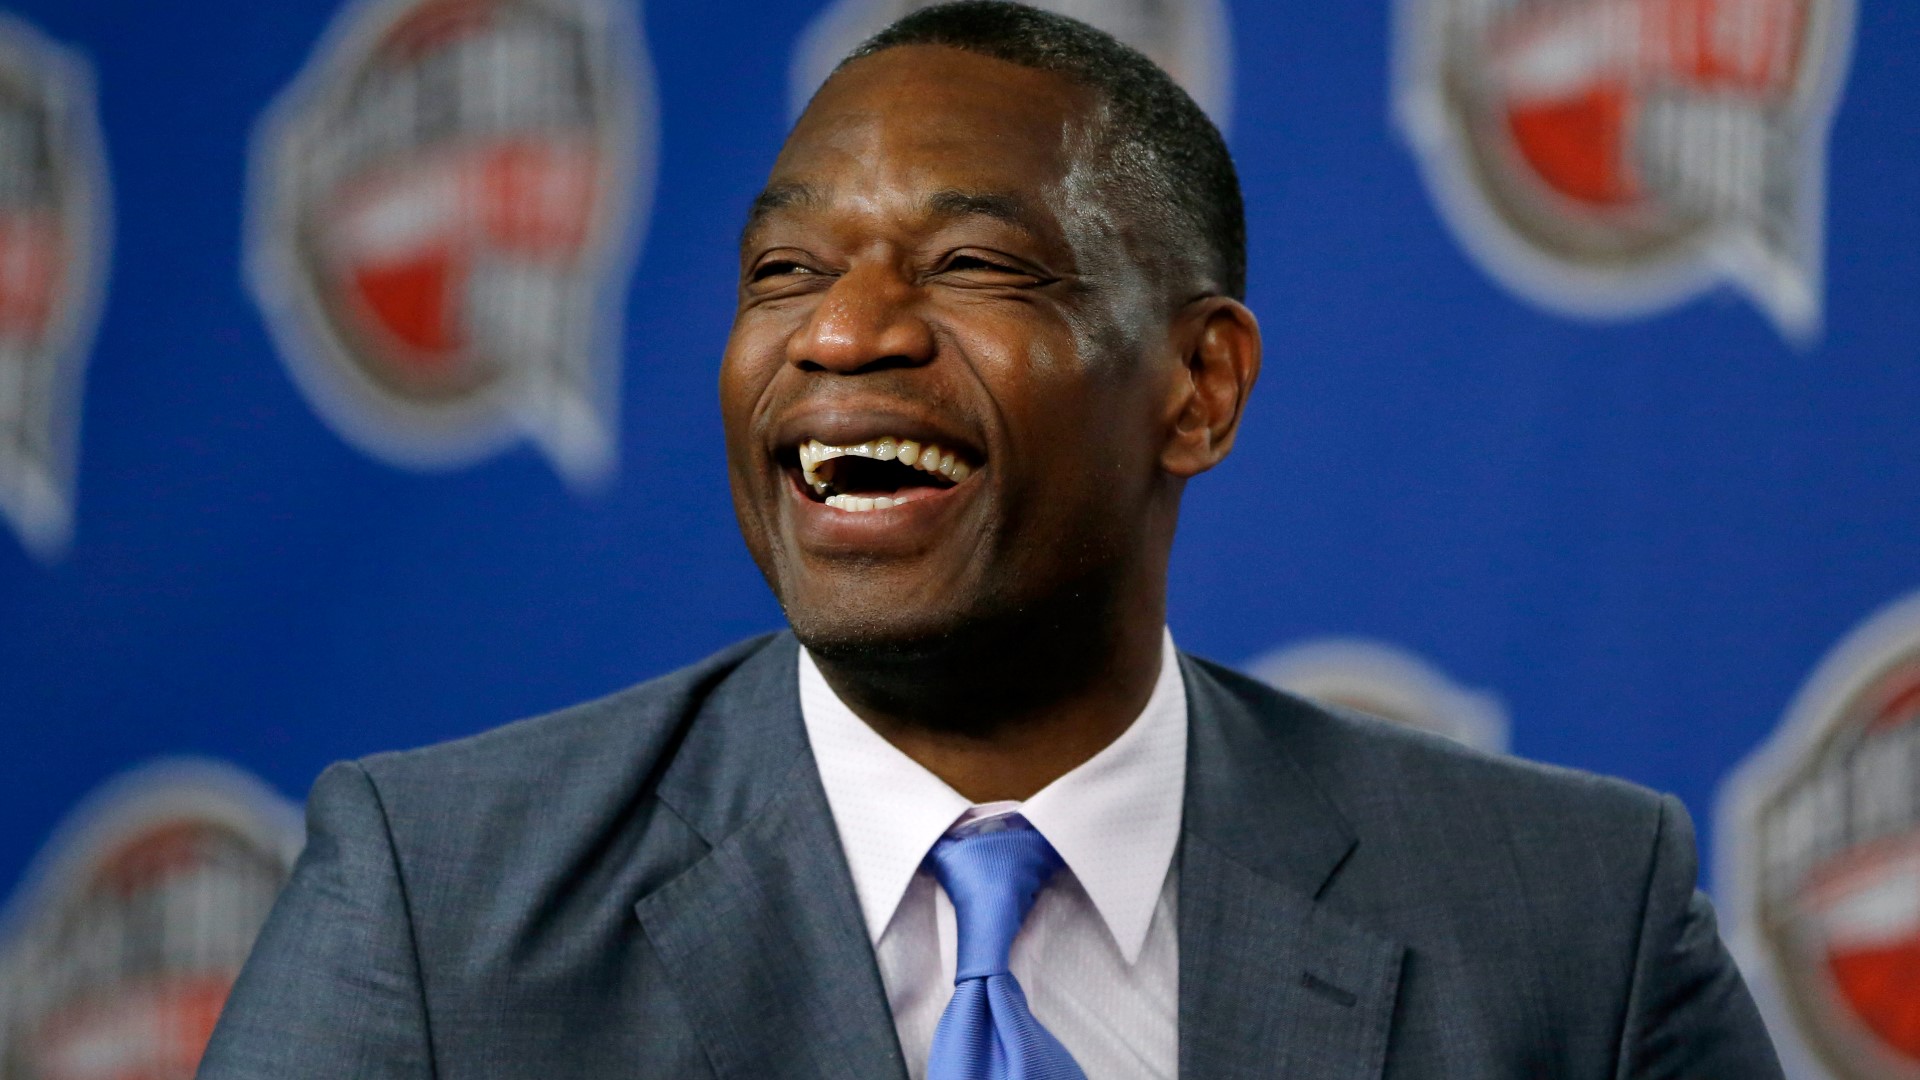 The 56-year-old Mutombo spent 18 seasons in the NBA, playing for Atlanta, Denver, Houston, Philadelphia, New York and the then-New Jersey Nets.